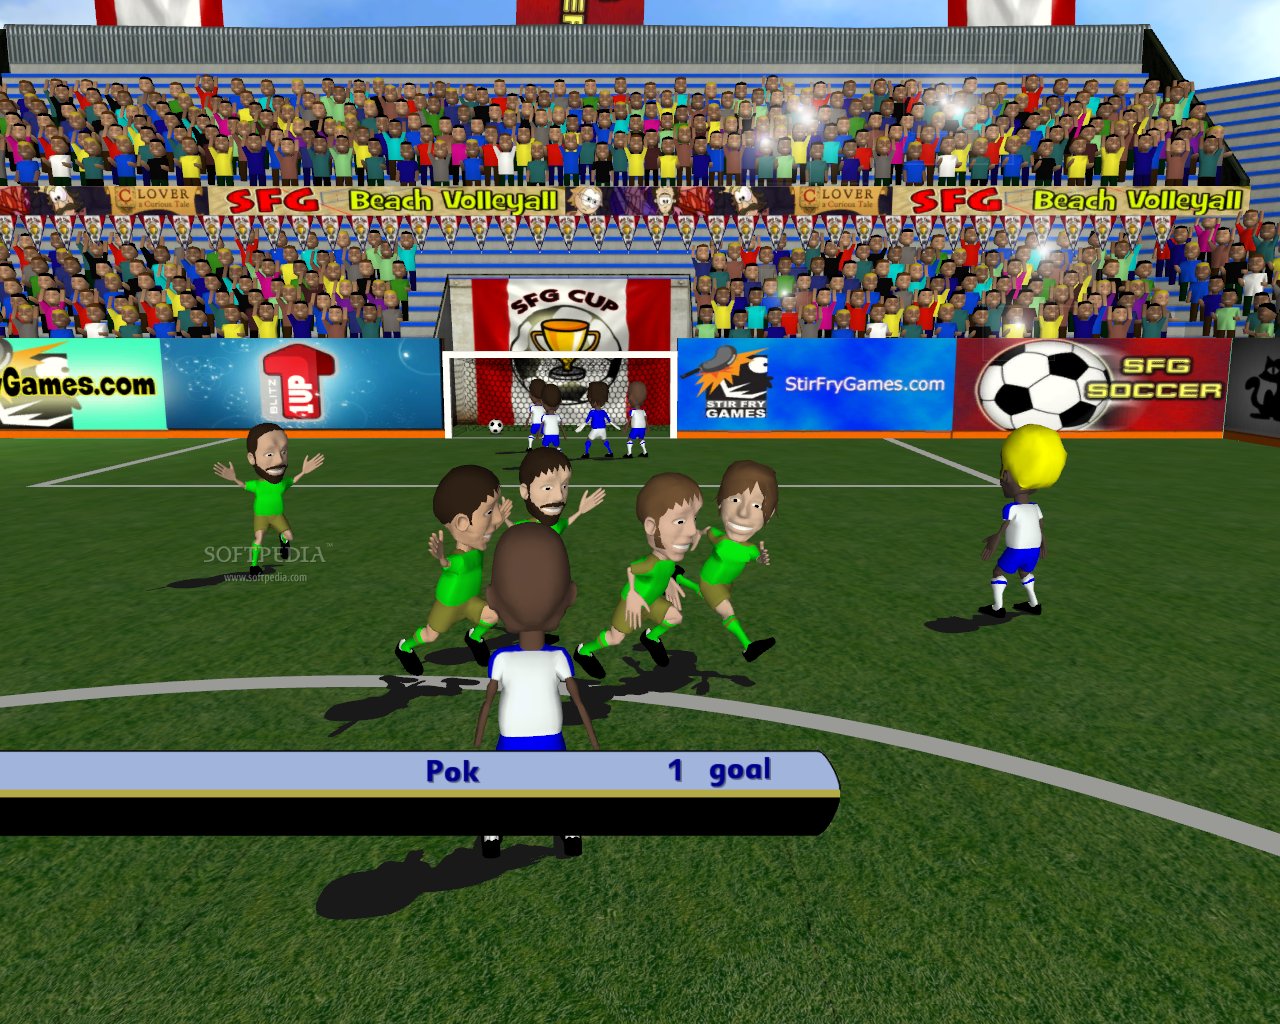 90 Minute Fever - Online Football (Soccer) Manager download the last version for ipod